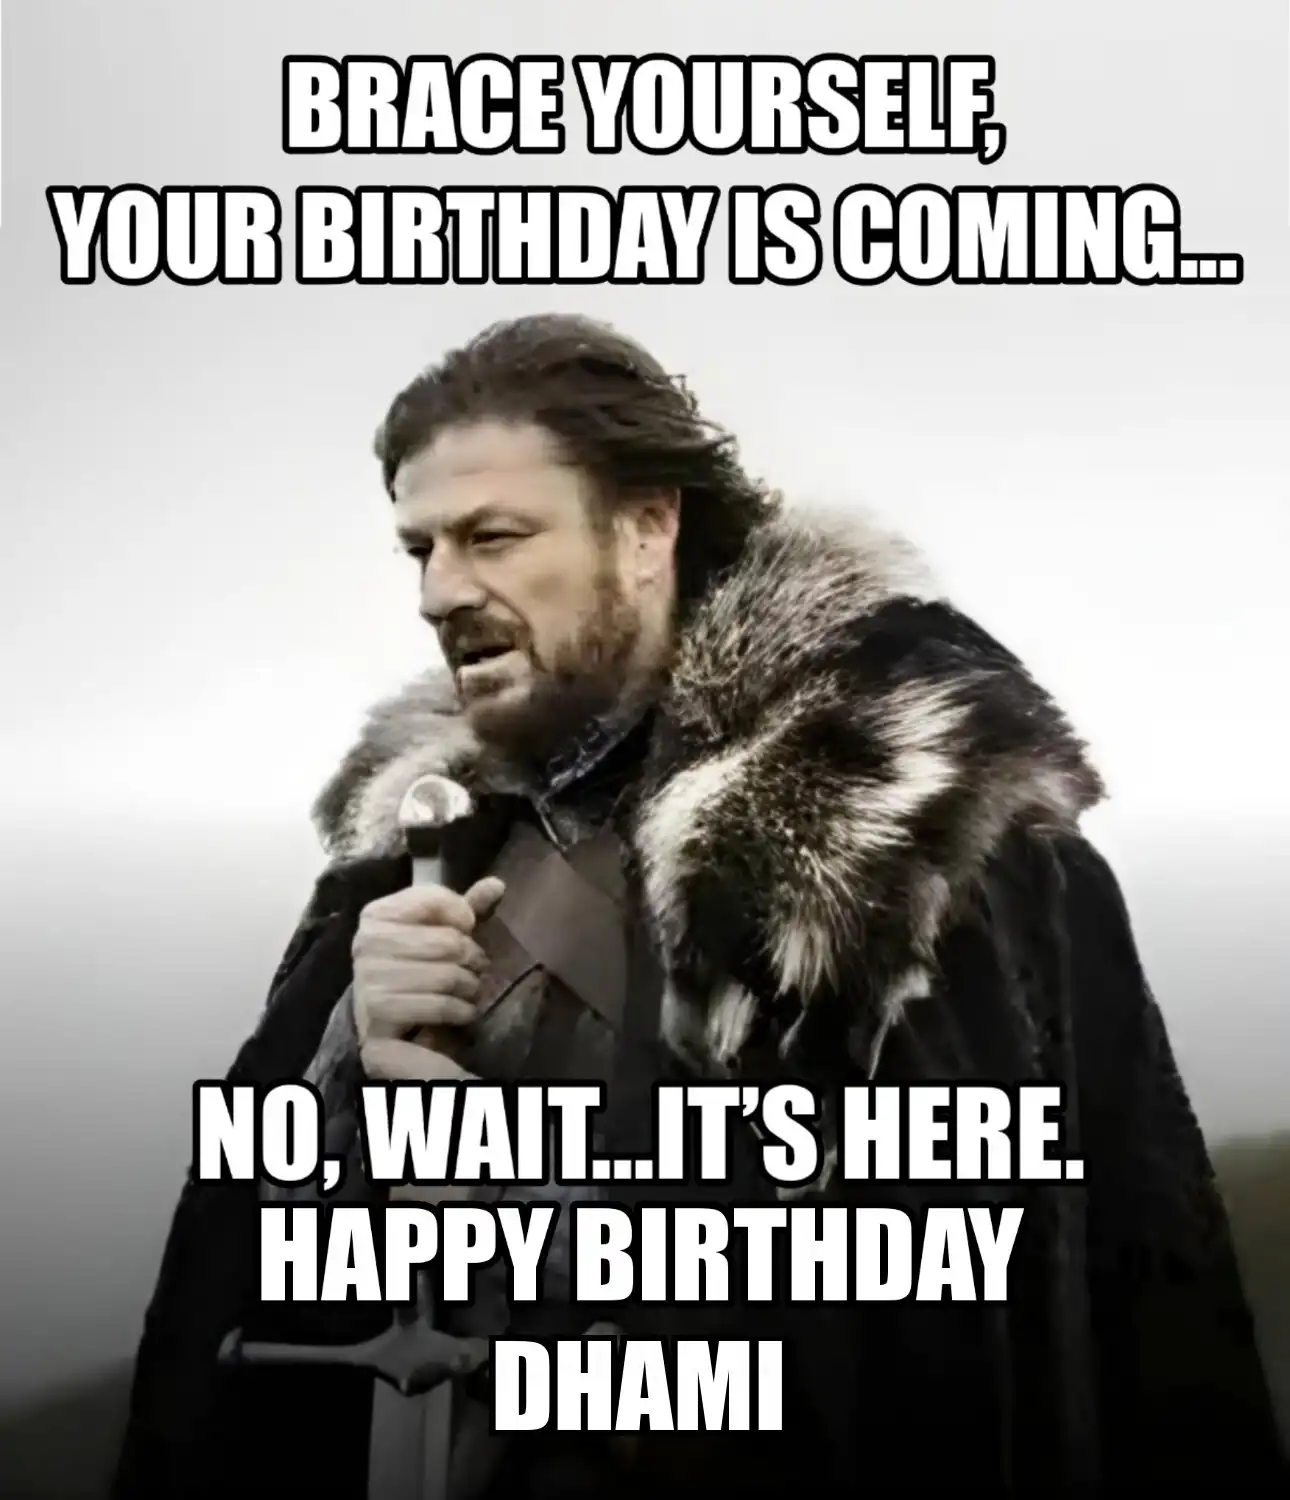 Happy Birthday Dhami Brace Yourself Your Birthday Is Coming Meme